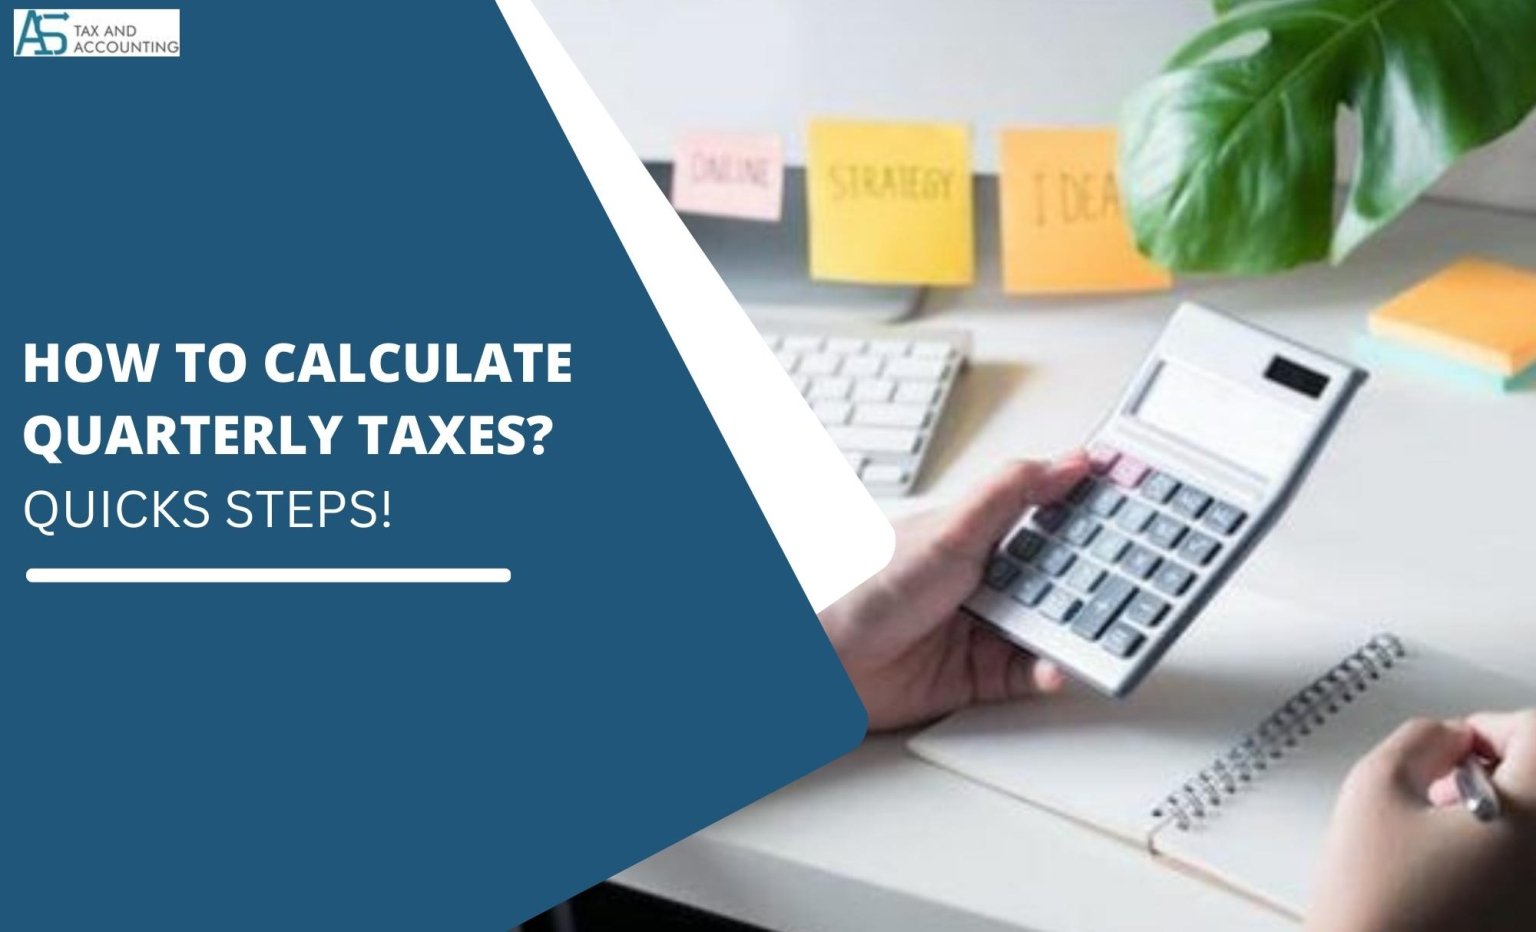 How to Calculate Quarterly Taxes?